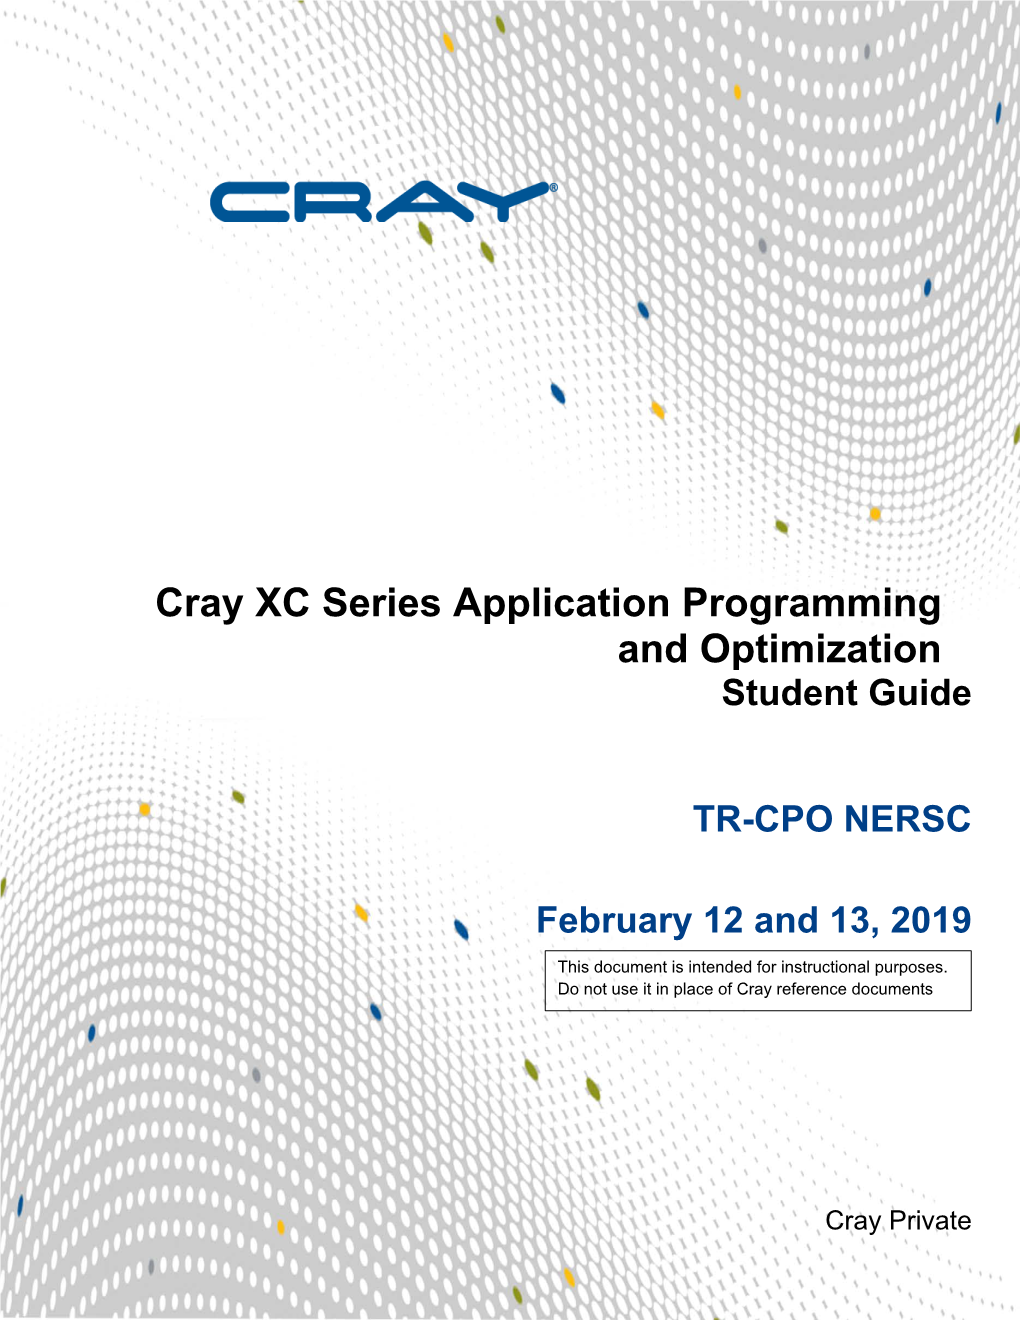 Cray XC Series Application Programming and Optimization Student Guide